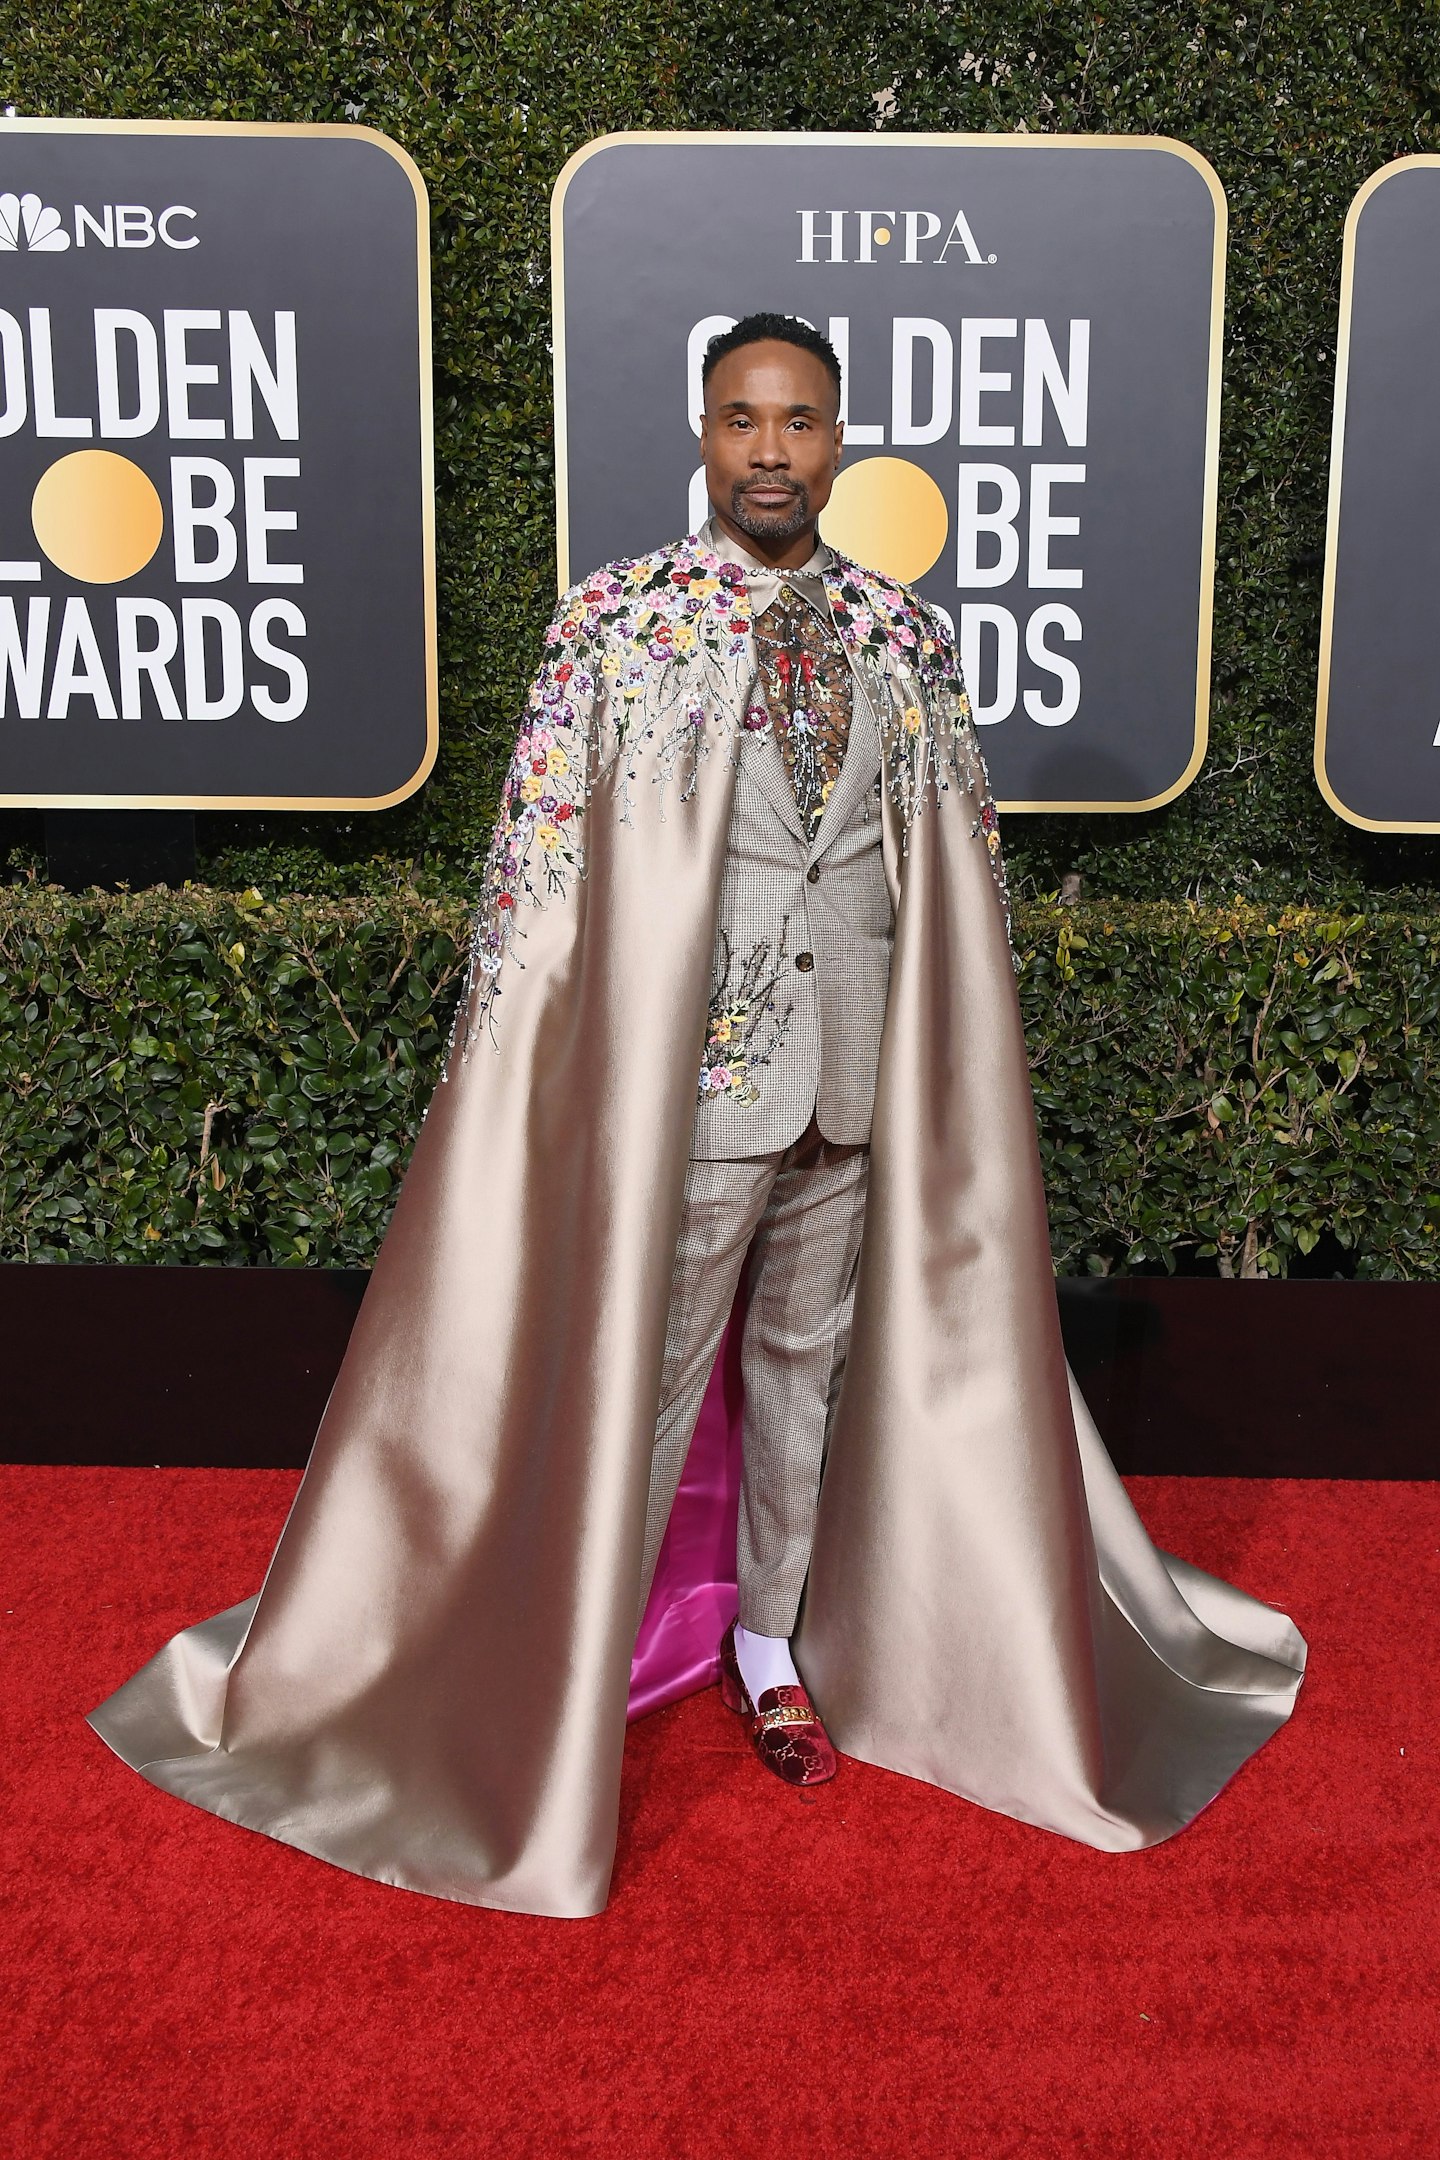 Billy Porter at the 2019 Golden Globes